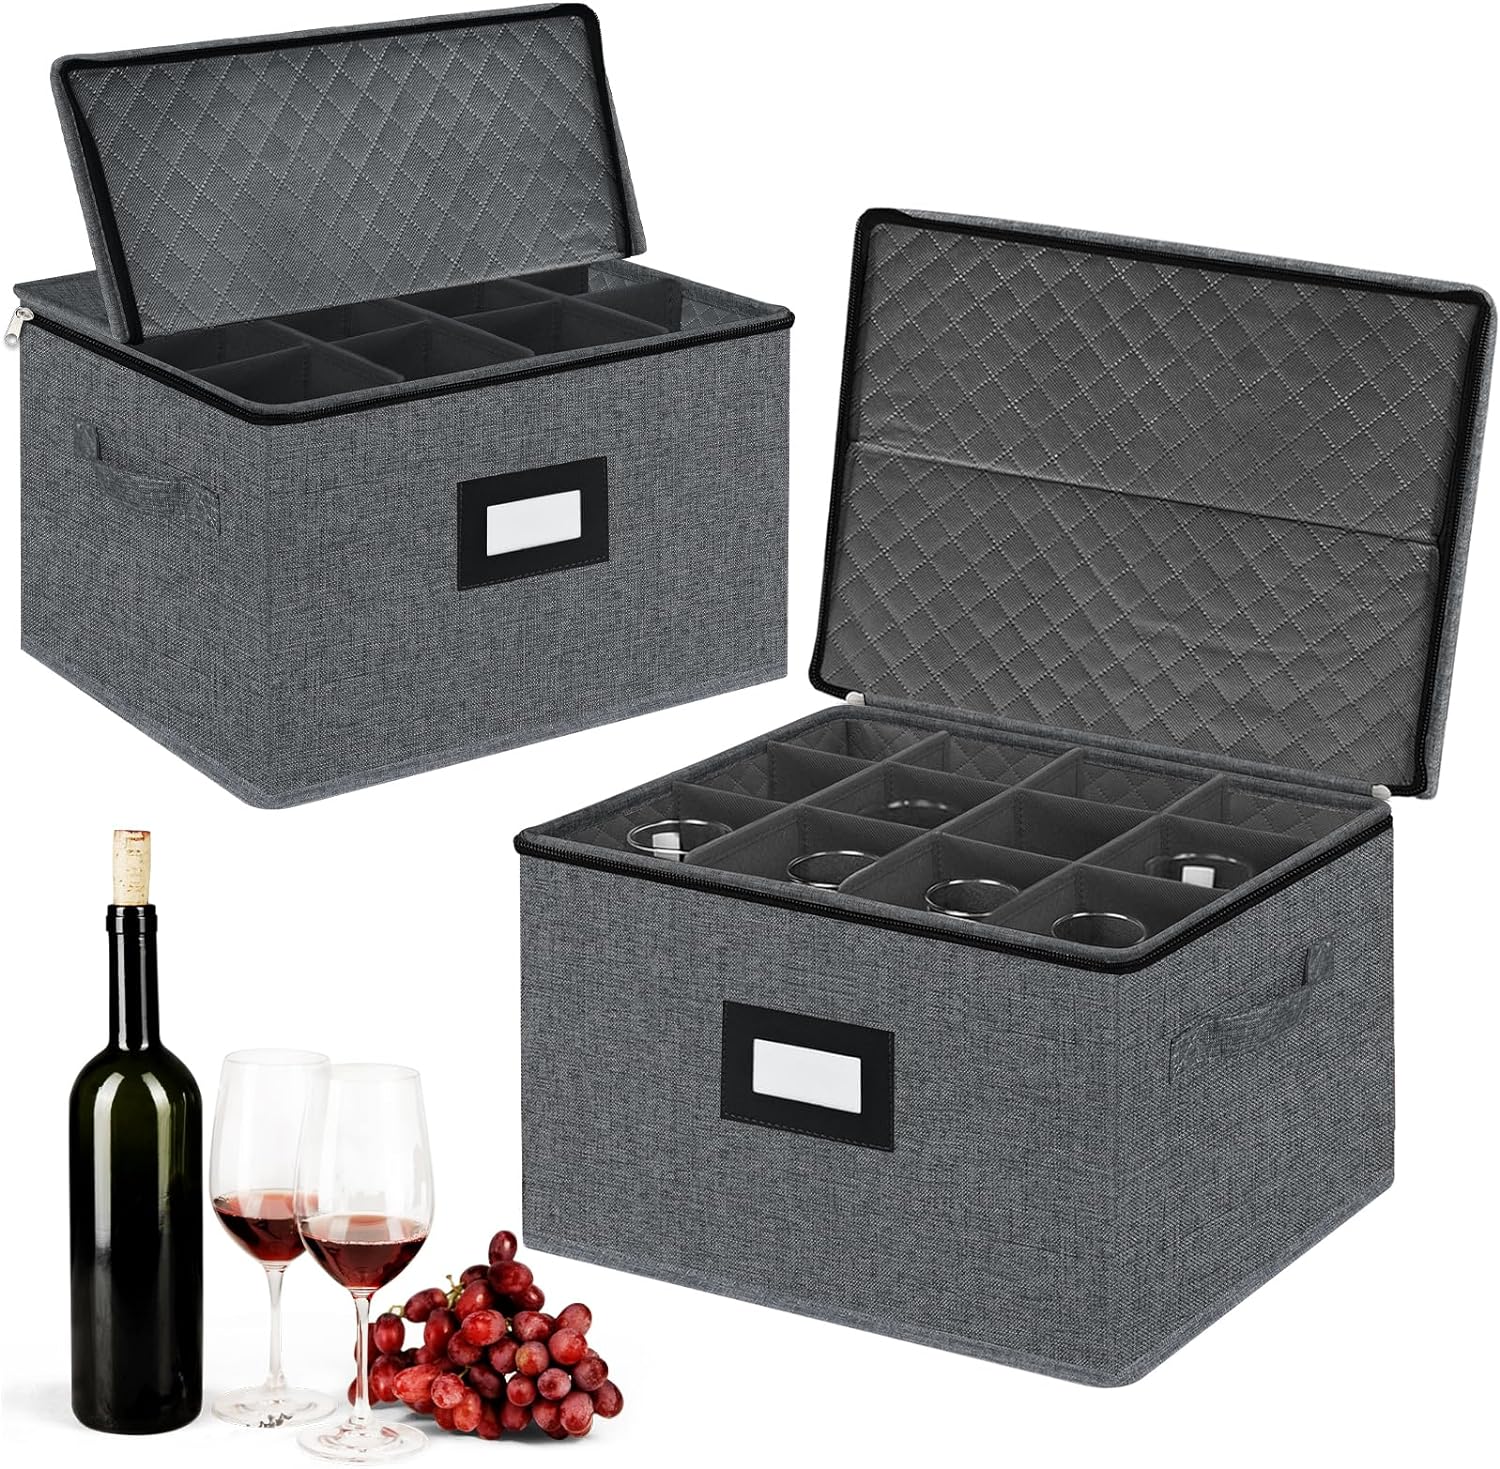 VERONLY 2 Pack Stemware Storage Cases -Quilted China Storage Containers Hard Shell for Glasses, Stackable Crystal Glassware Storage with Label, Handles for Protection,Moving (Dark Gray)